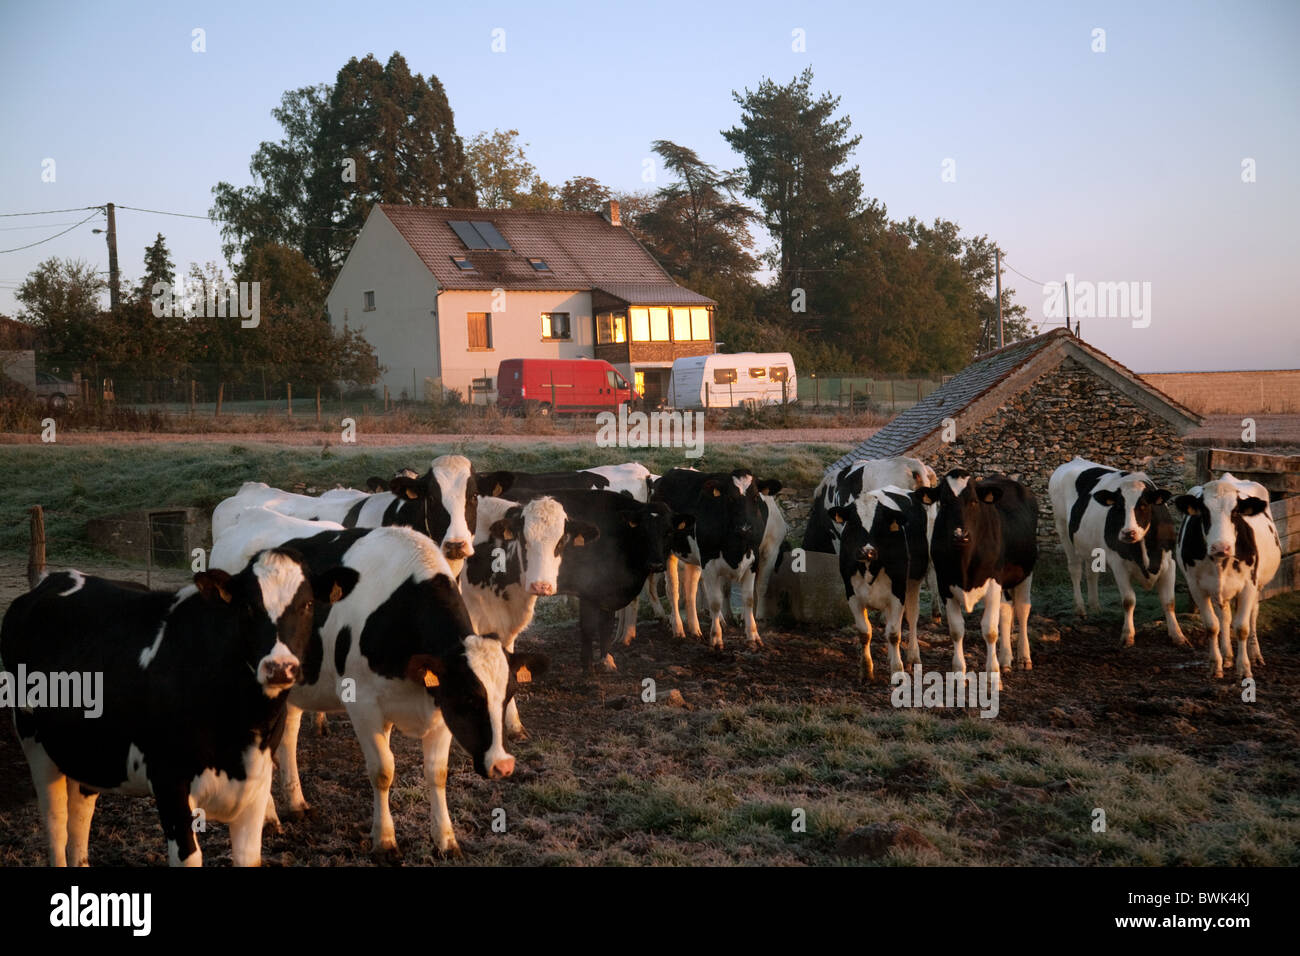 A herd of dairy cows on a french farm; example of agriculture or farming,  in St Simeon village, Ile de France Northern France, Europe Stock Photo